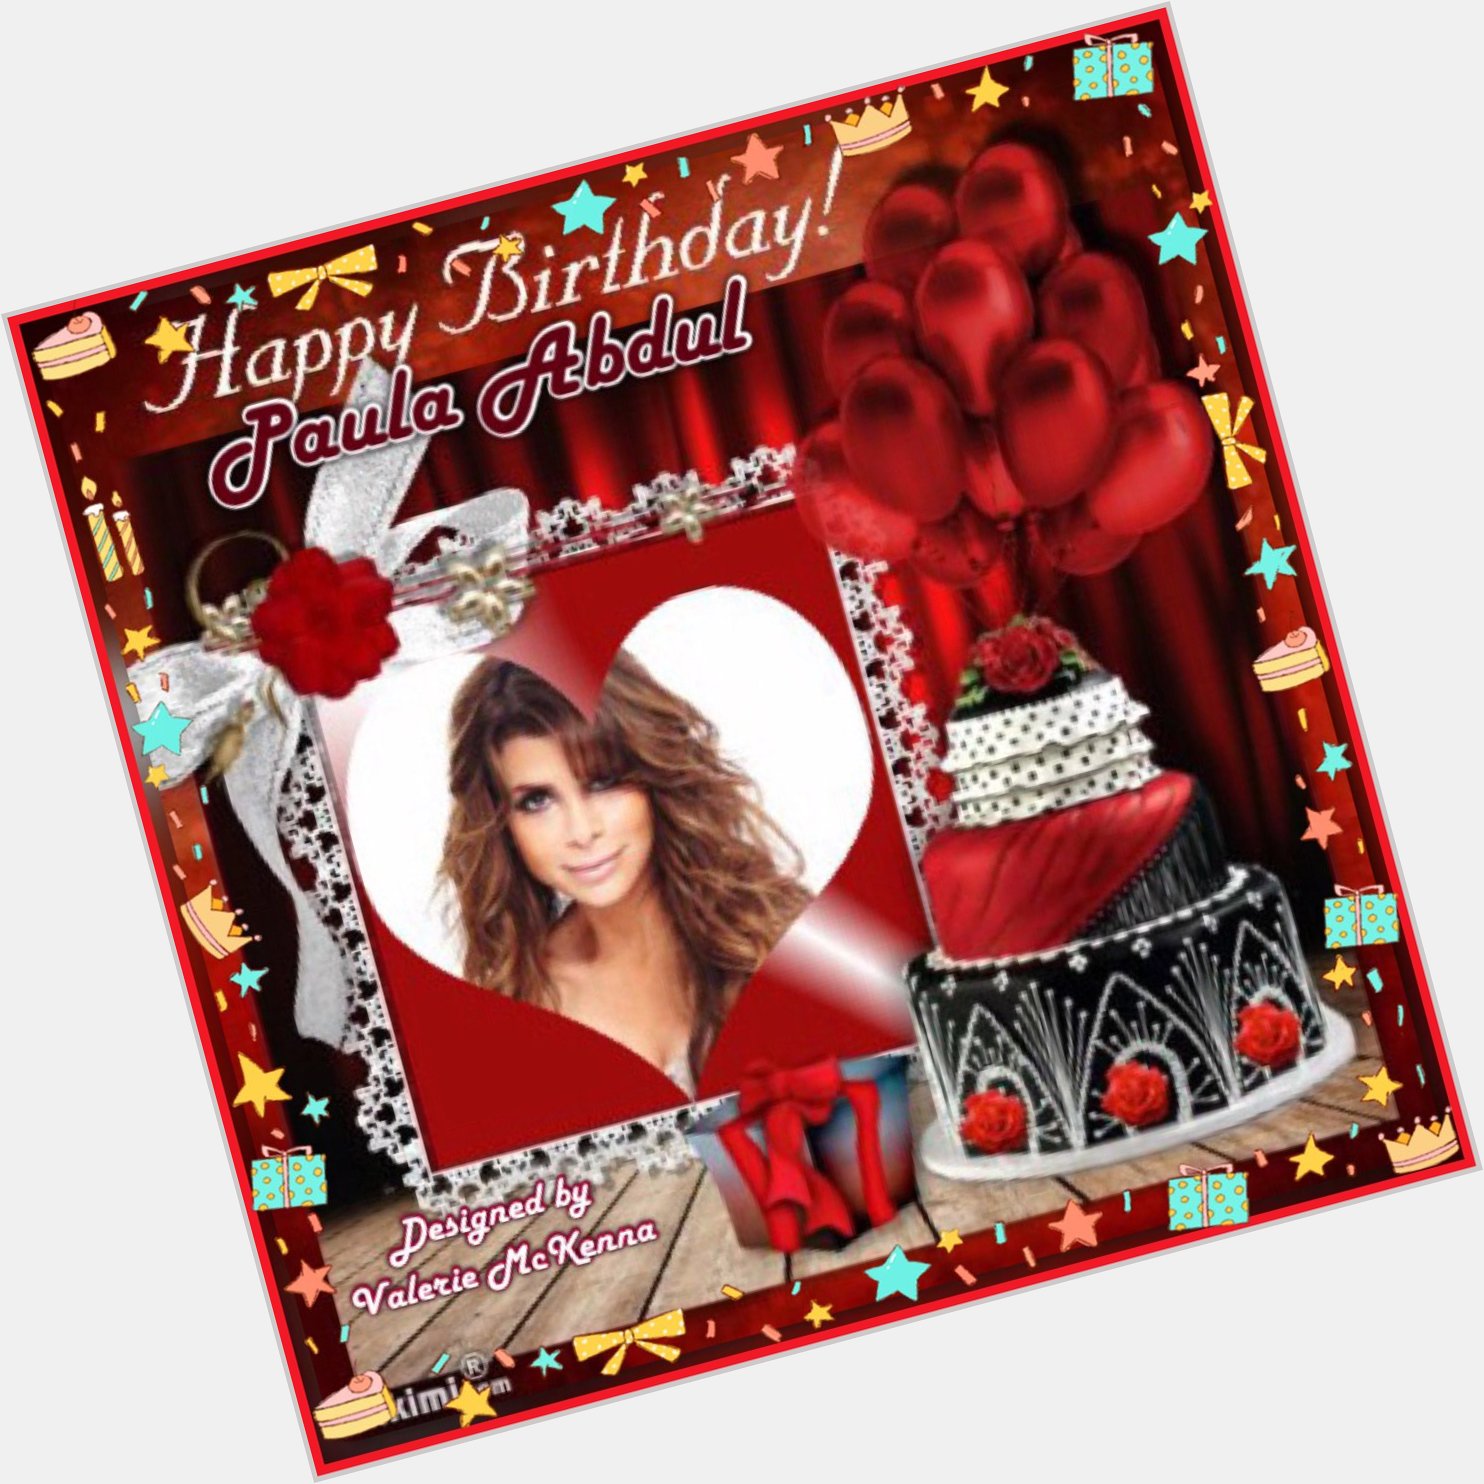  Happy Birthday Paula Abdul hope you have an awesome day. I made this for you. Enjoy your day 